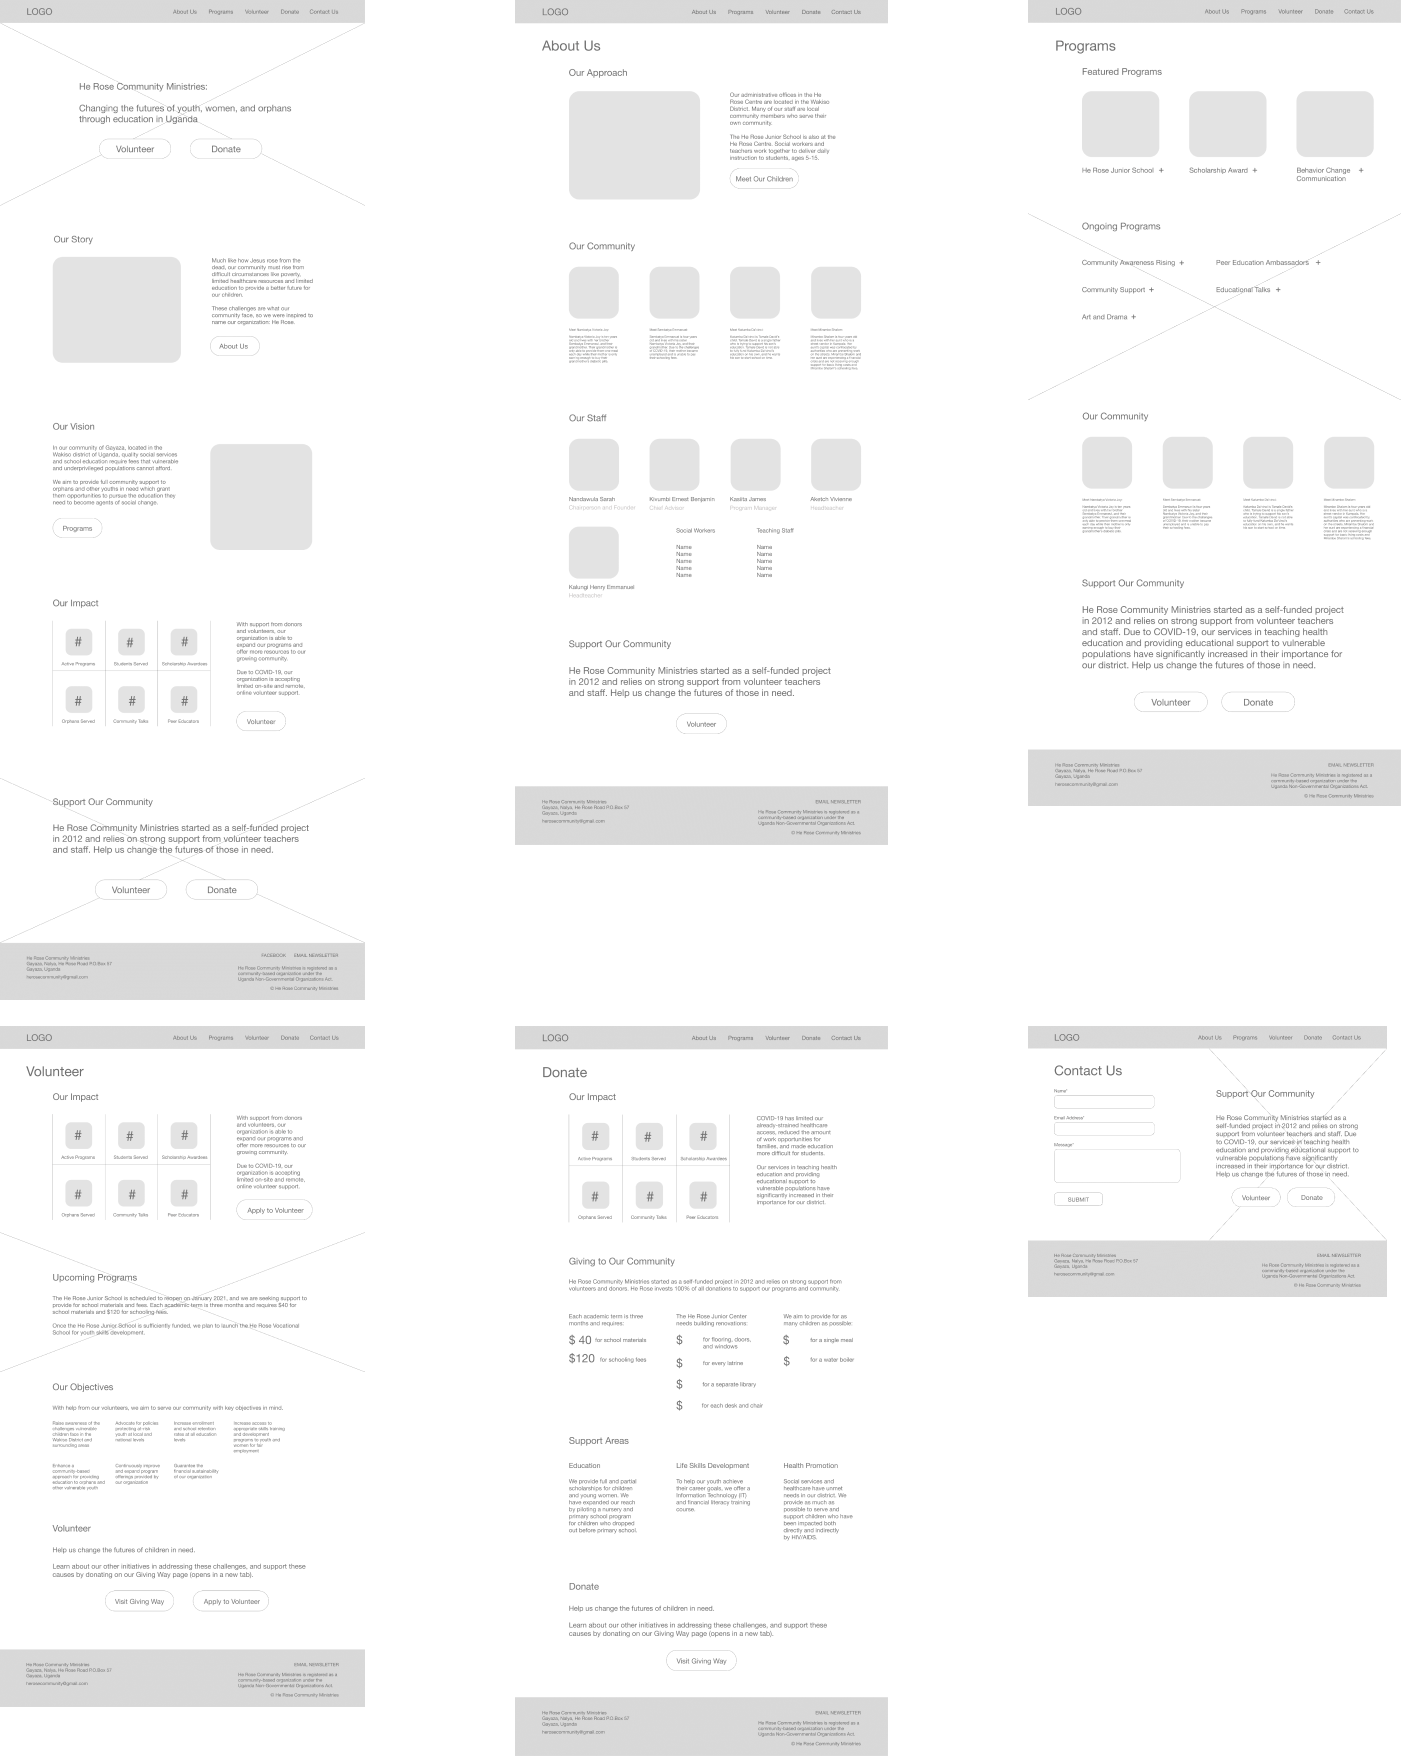 Images of wireframes.